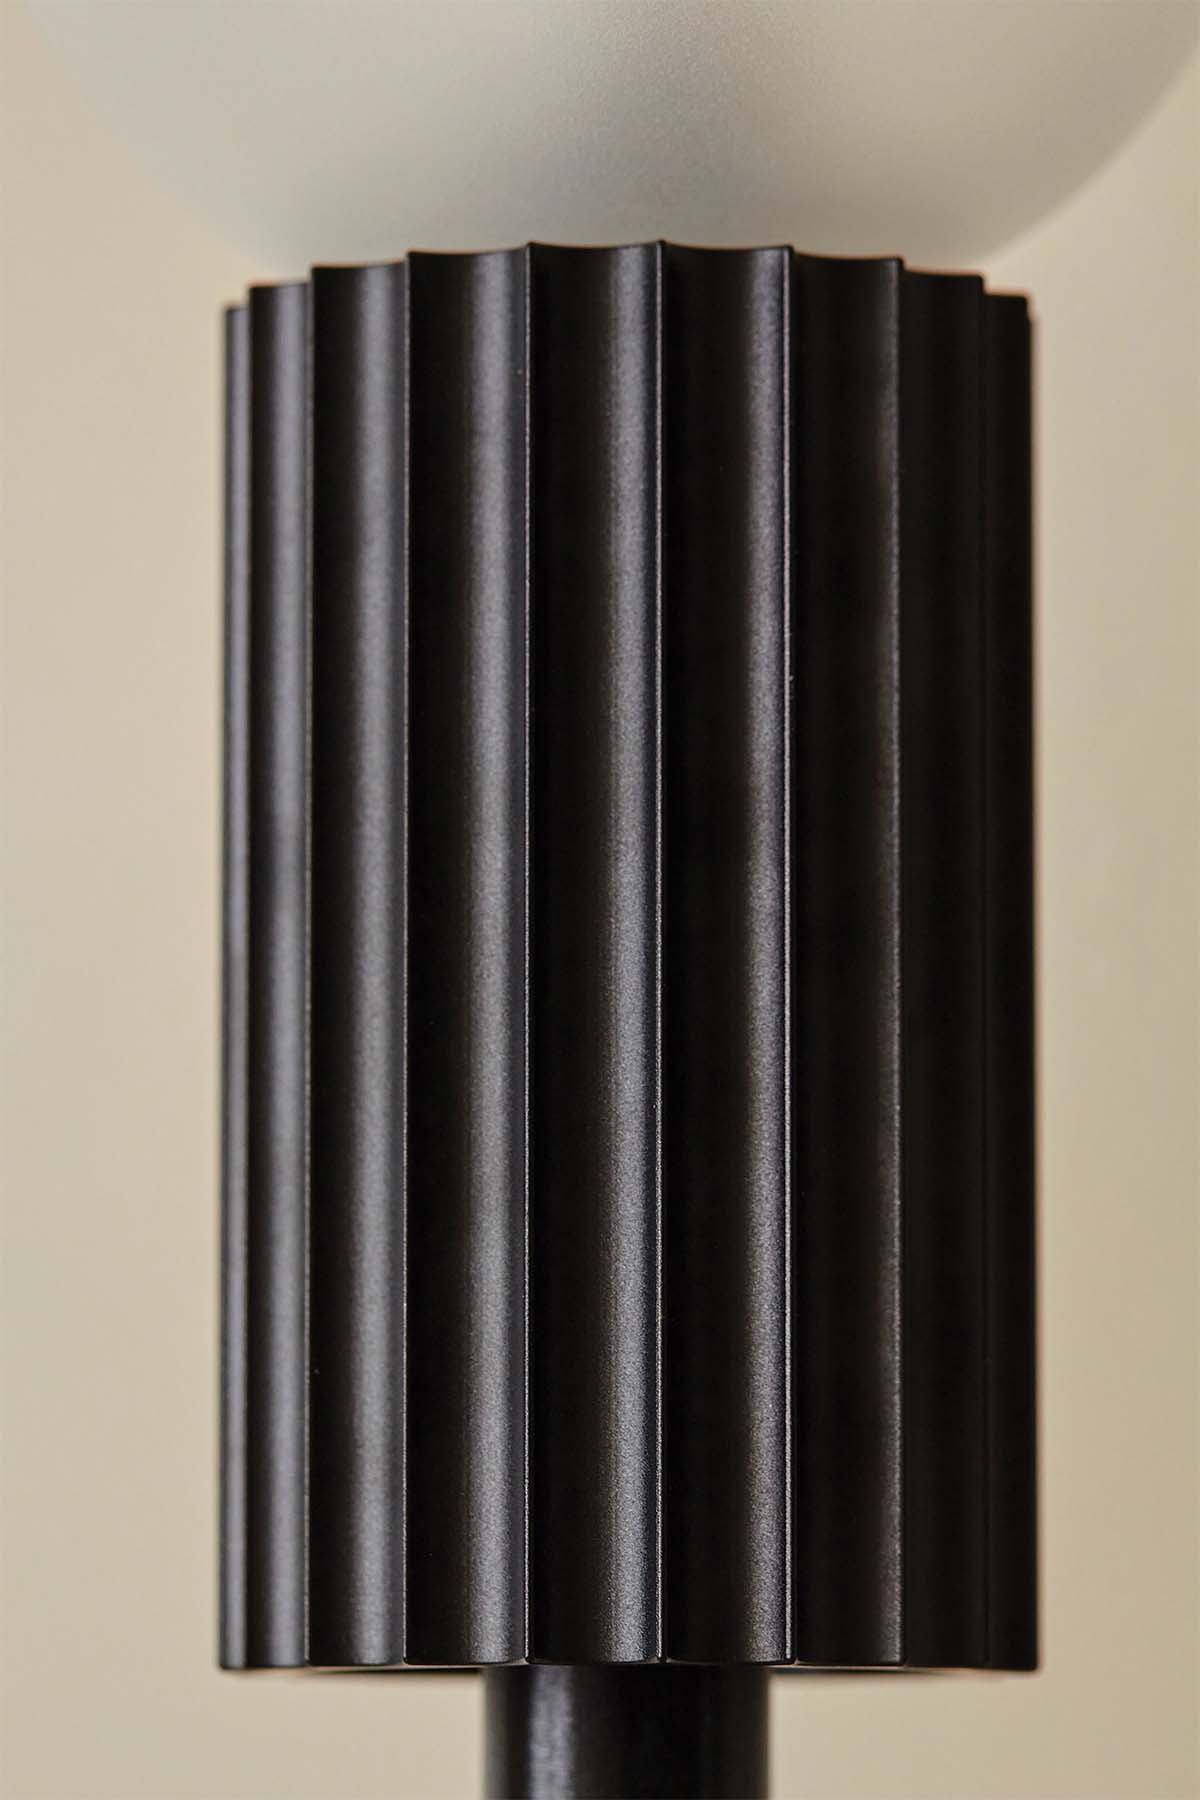 Attalos Wall Light in Brushed Black, detail. Image by Lawrence Furzey